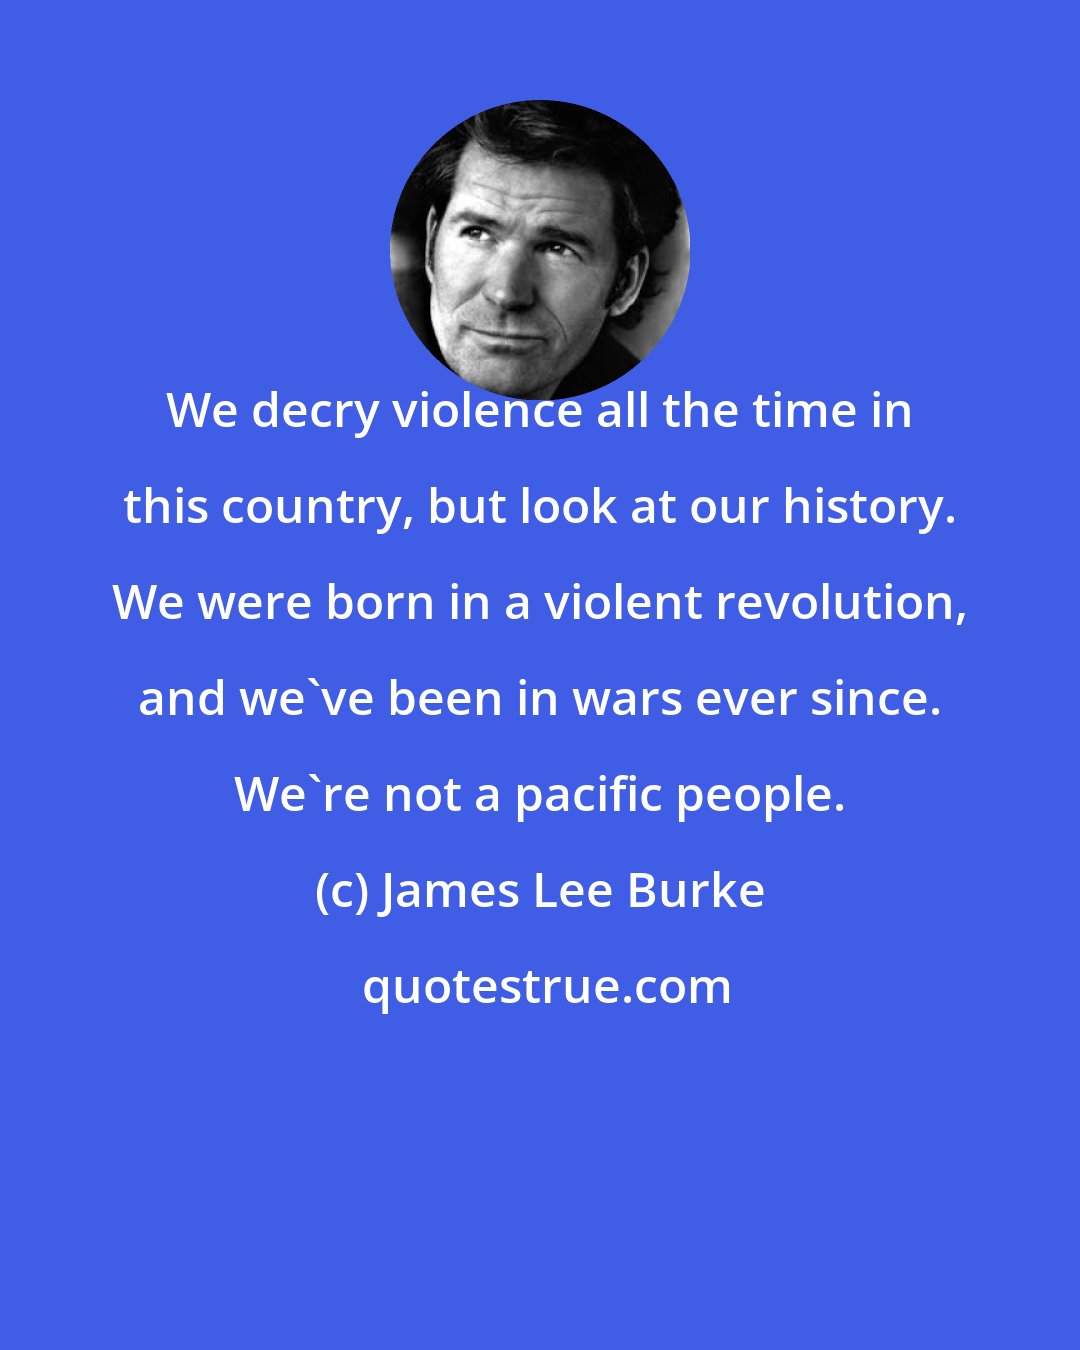 James Lee Burke: We decry violence all the time in this country, but look at our history. We were born in a violent revolution, and we've been in wars ever since. We're not a pacific people.